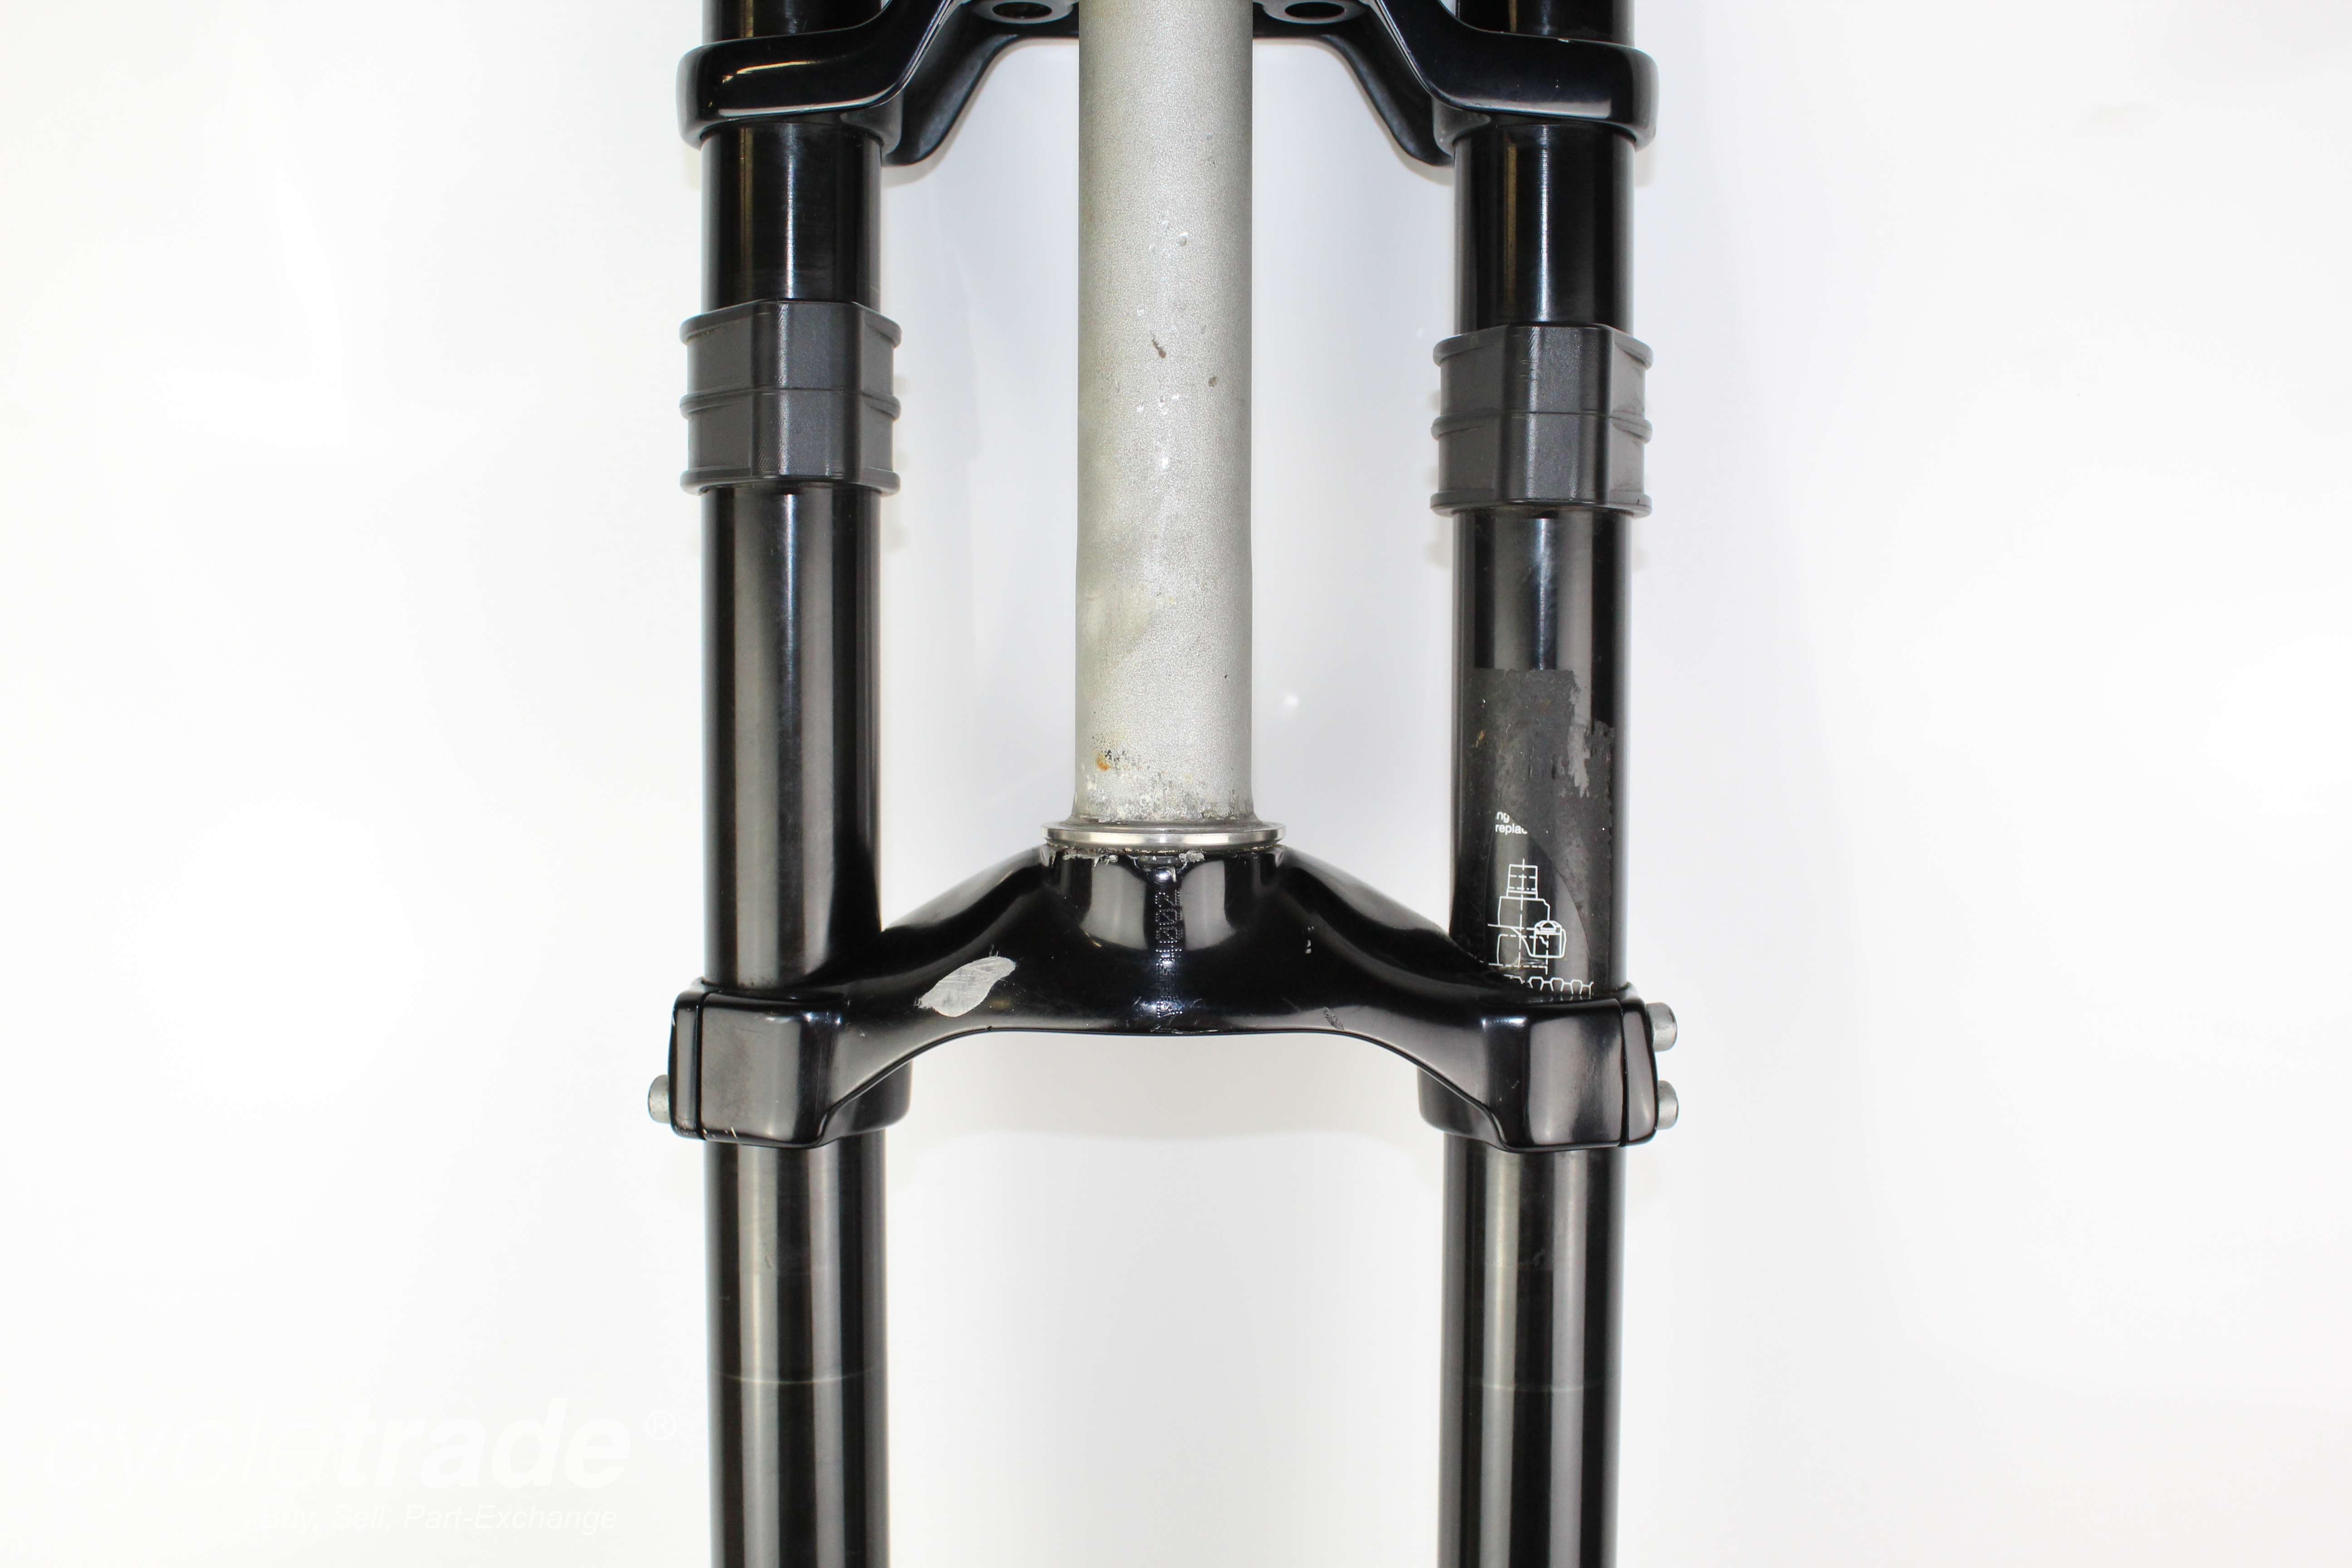 MTB Fork- Marzocchi Super T Pro 170mm 26" 20x110mm Boost - Repairs/Spares